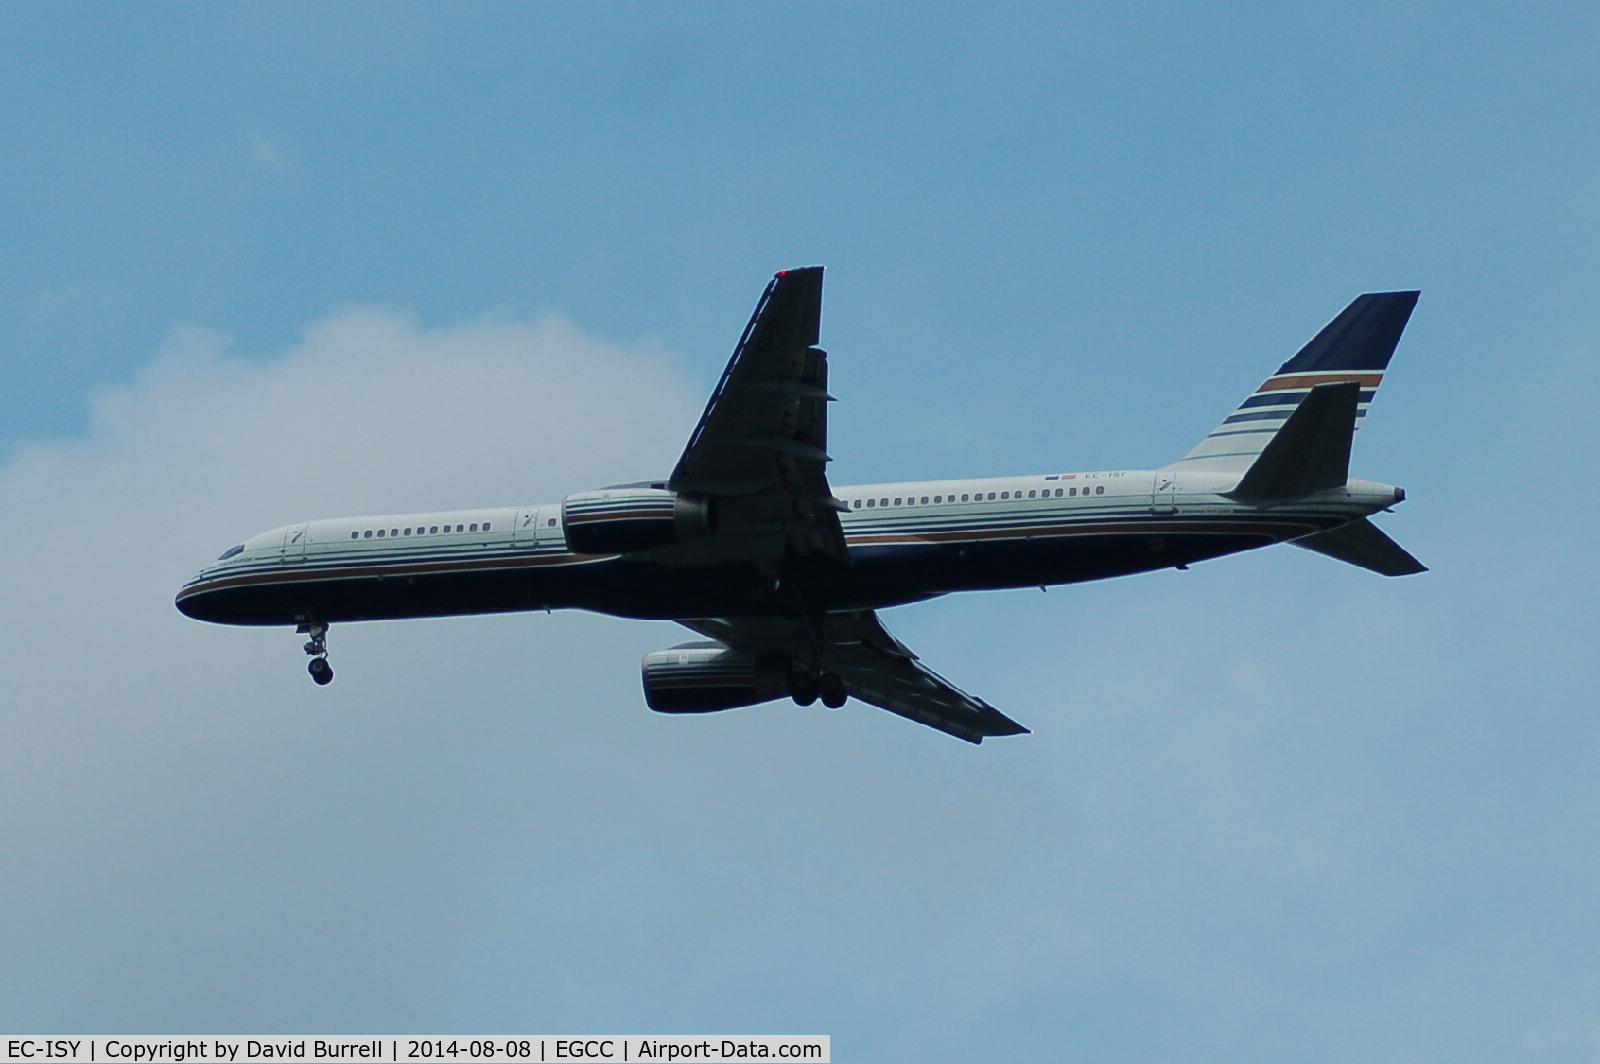 EC-ISY, 1993 Boeing 757-256 C/N 26241, Privilege Style Boeing 757-256 EC-ISY on approach to Manchester Airport.